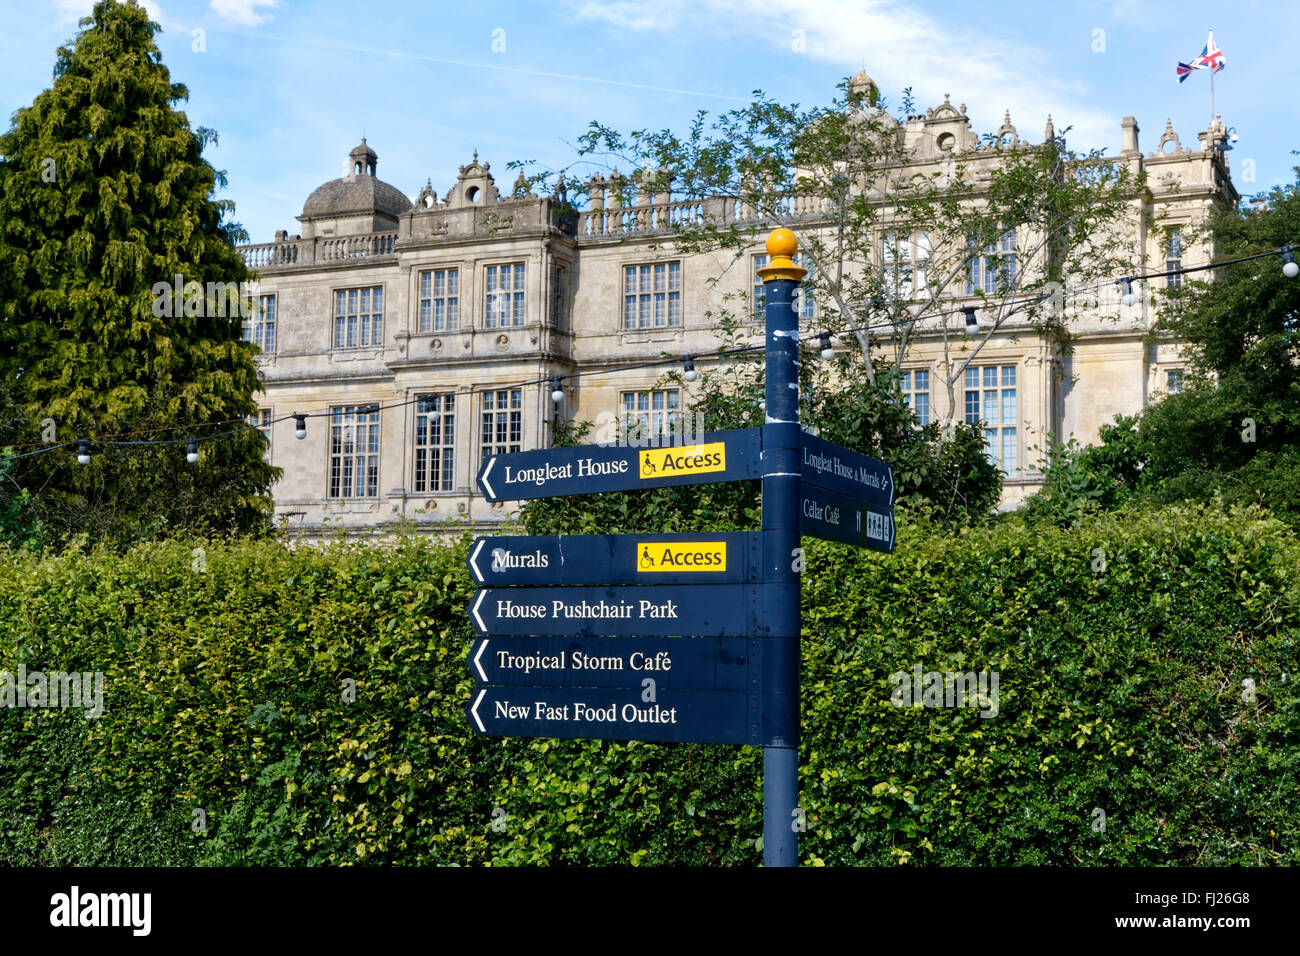 A Signpost pointing the way to attractions for visitors at Longleat House,Wiltshire, United Kingdom. Stock Photo